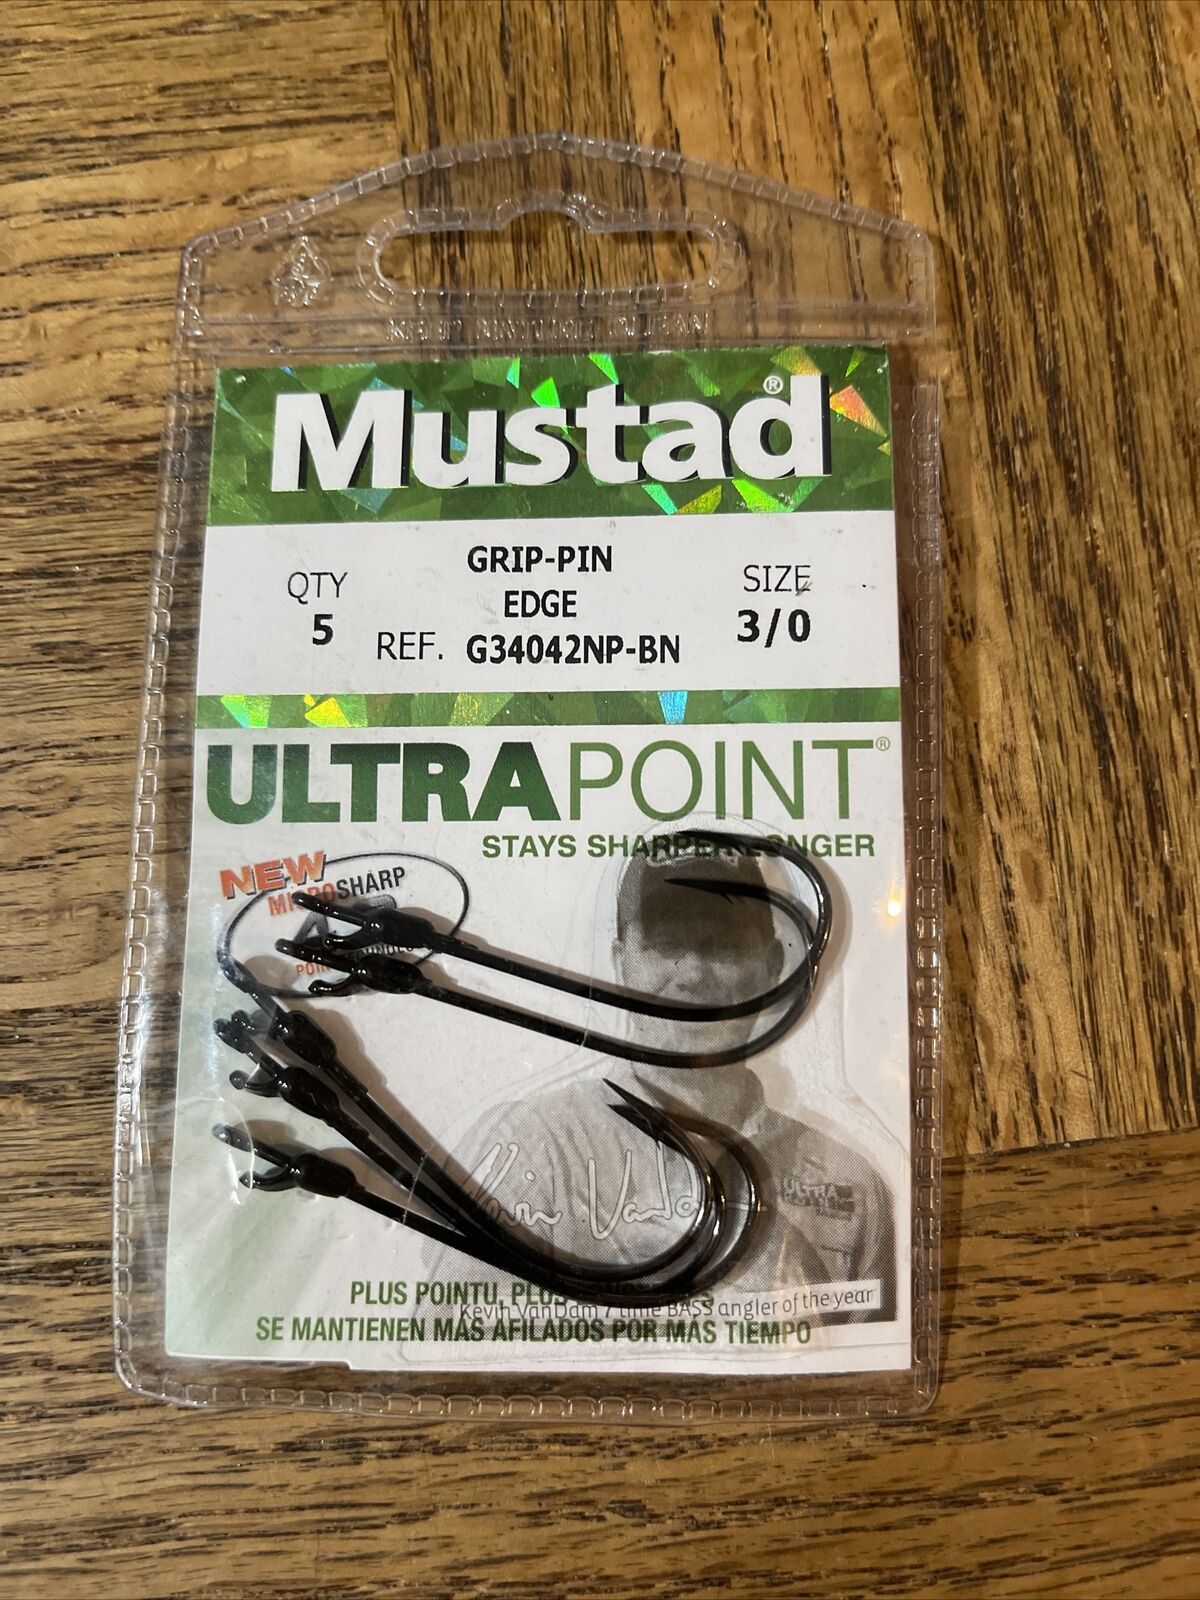 Mustad Grip Pin Hook Size 3/0 and 50 similar items